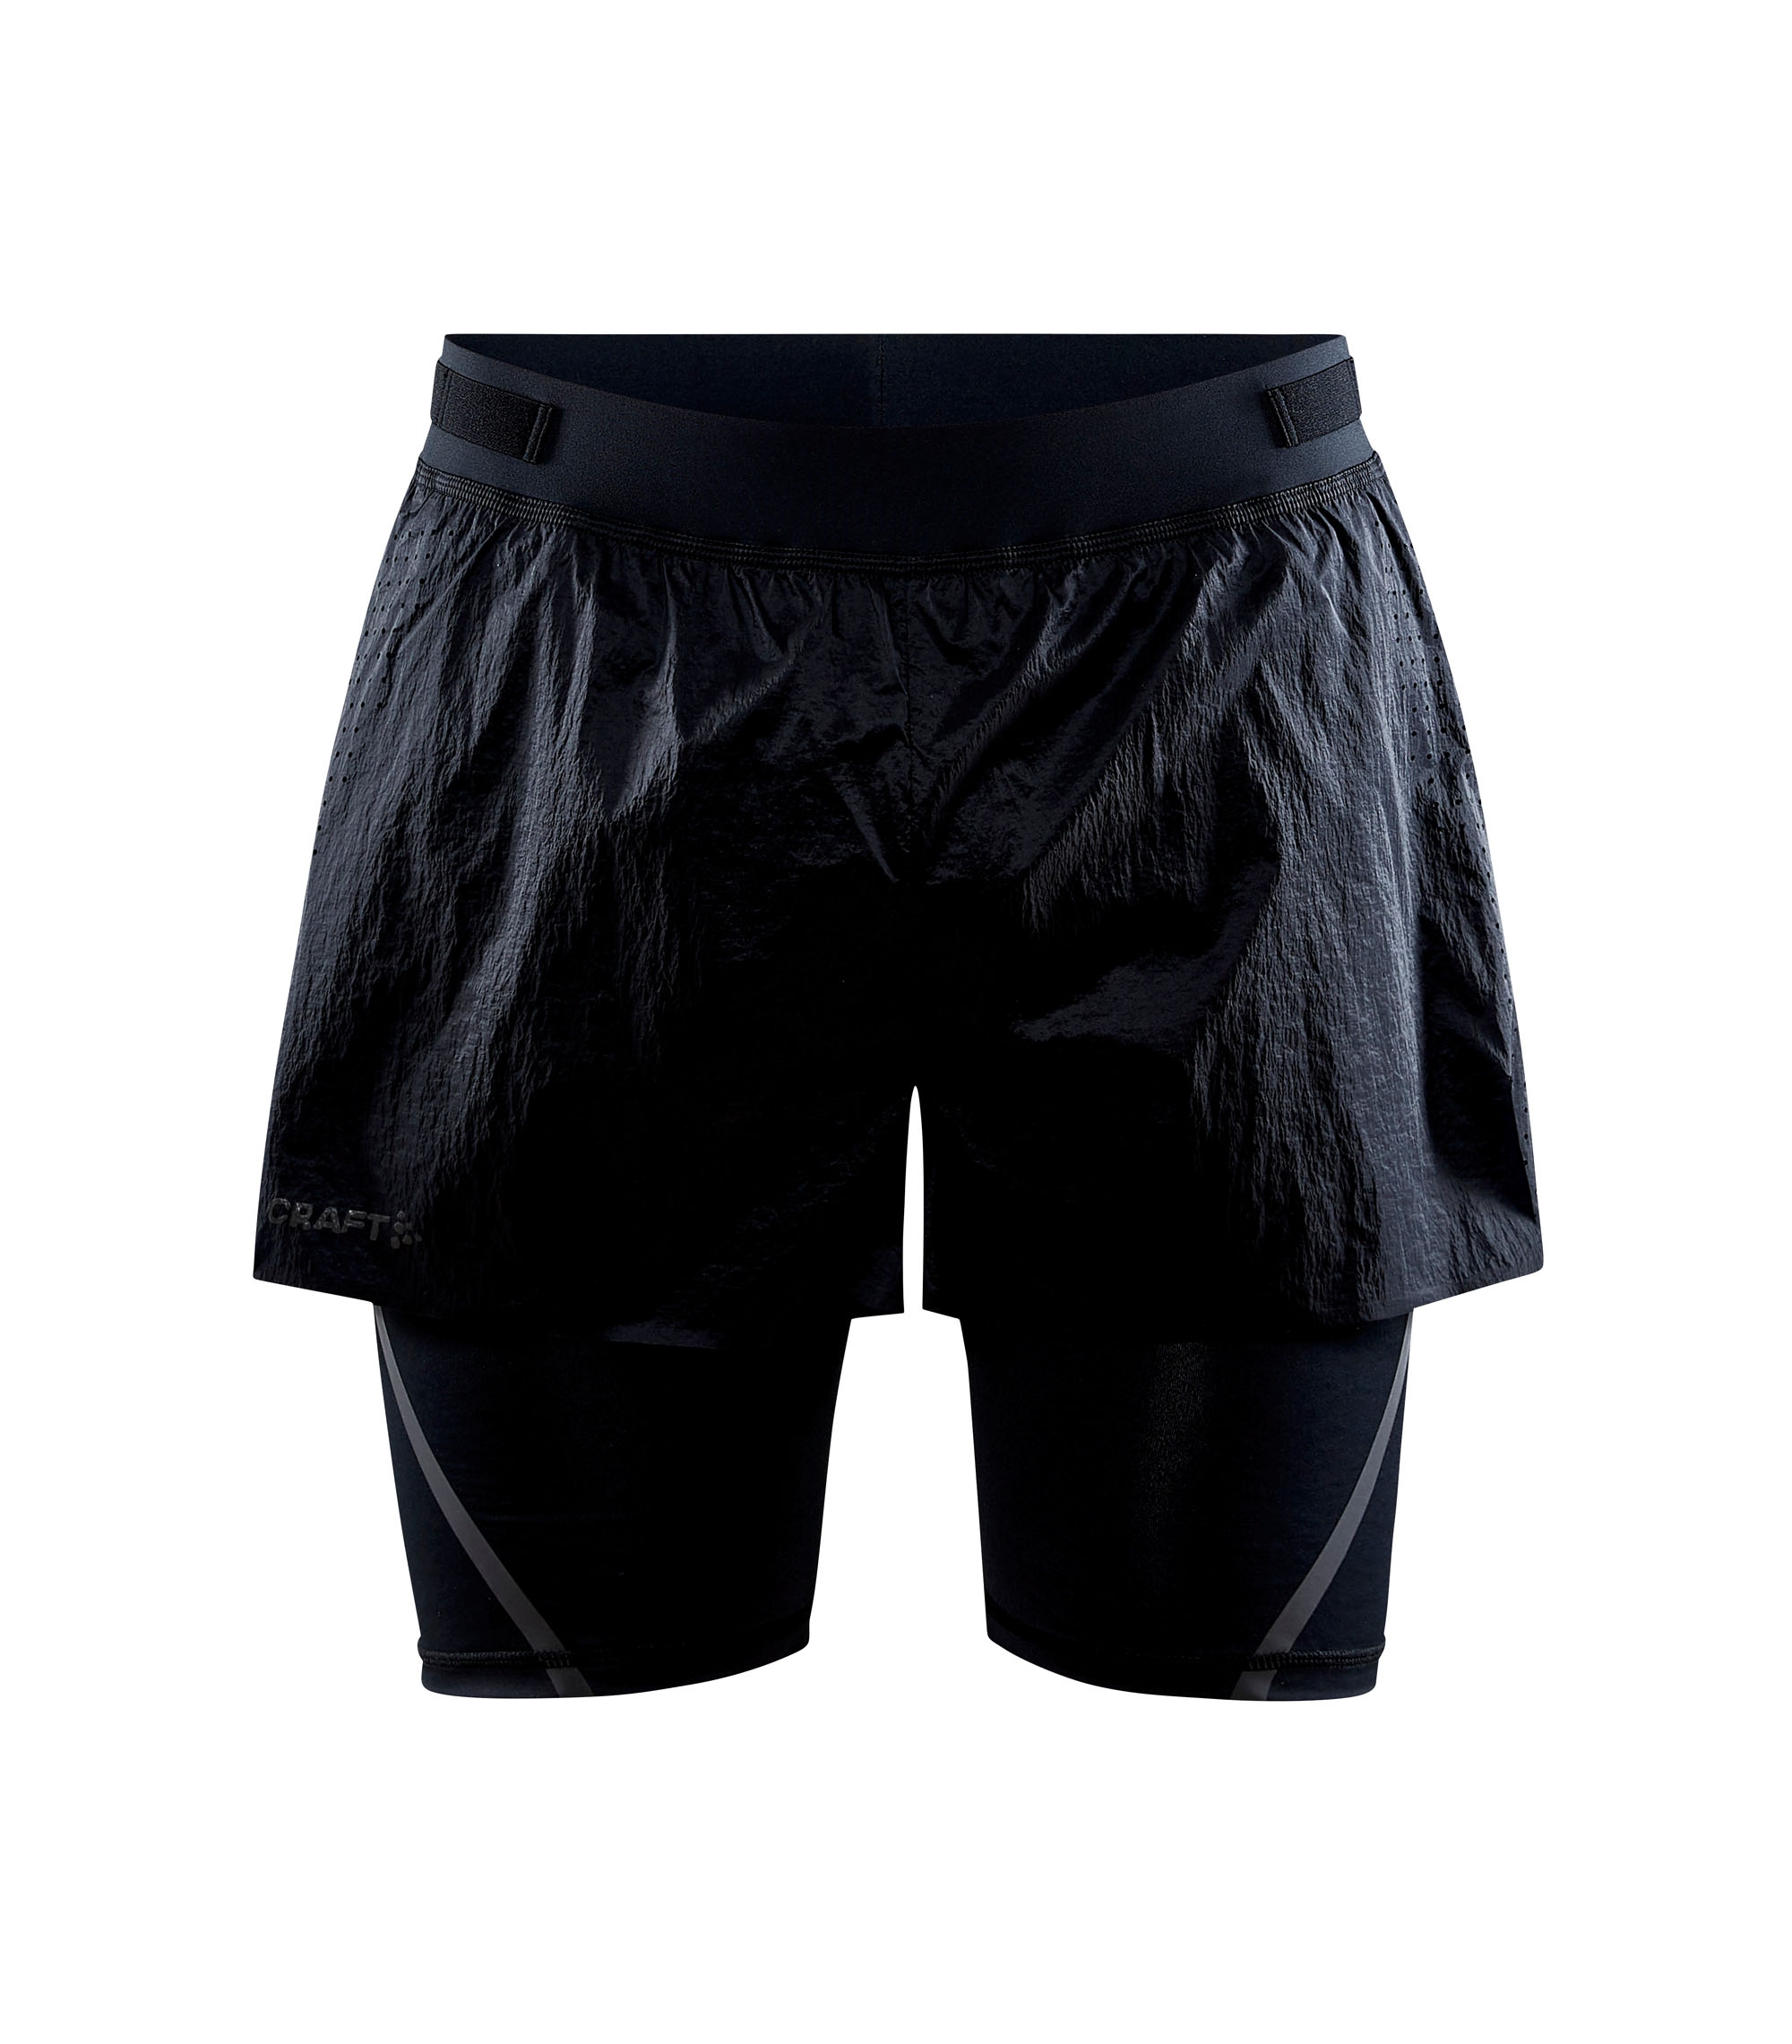 craft shorts ctm distance 2 in 1 donna